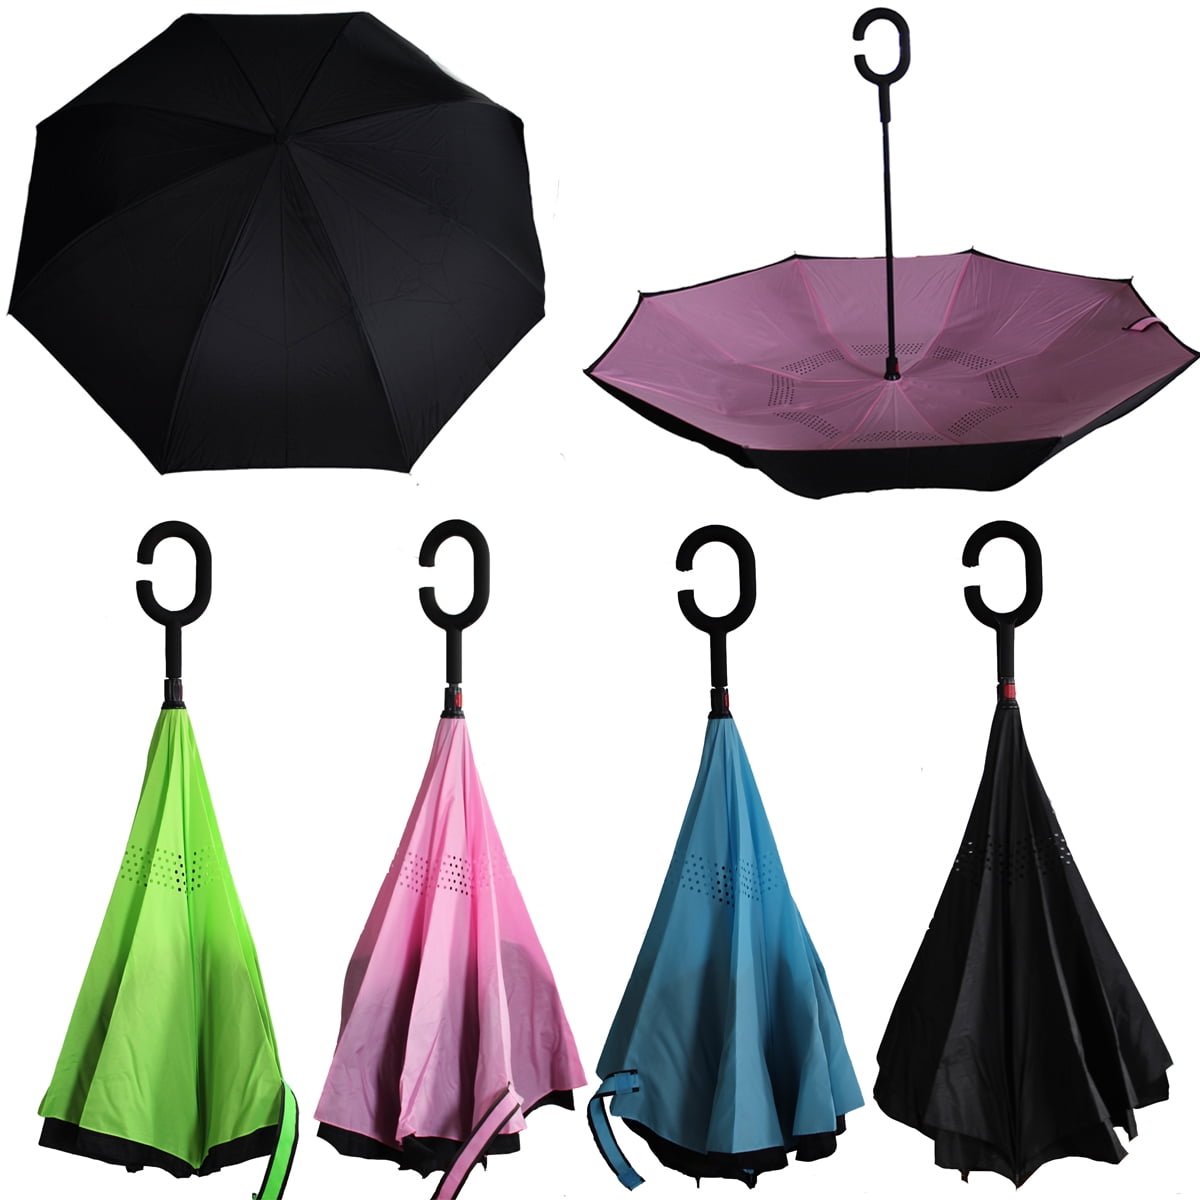 Double Layer Inverted Inverted Umbrella Is Light And Sturdy Autumn Beijing China Falling Maple Leaves Reverse Umbrella And Windproof Umbrella Edge Ni